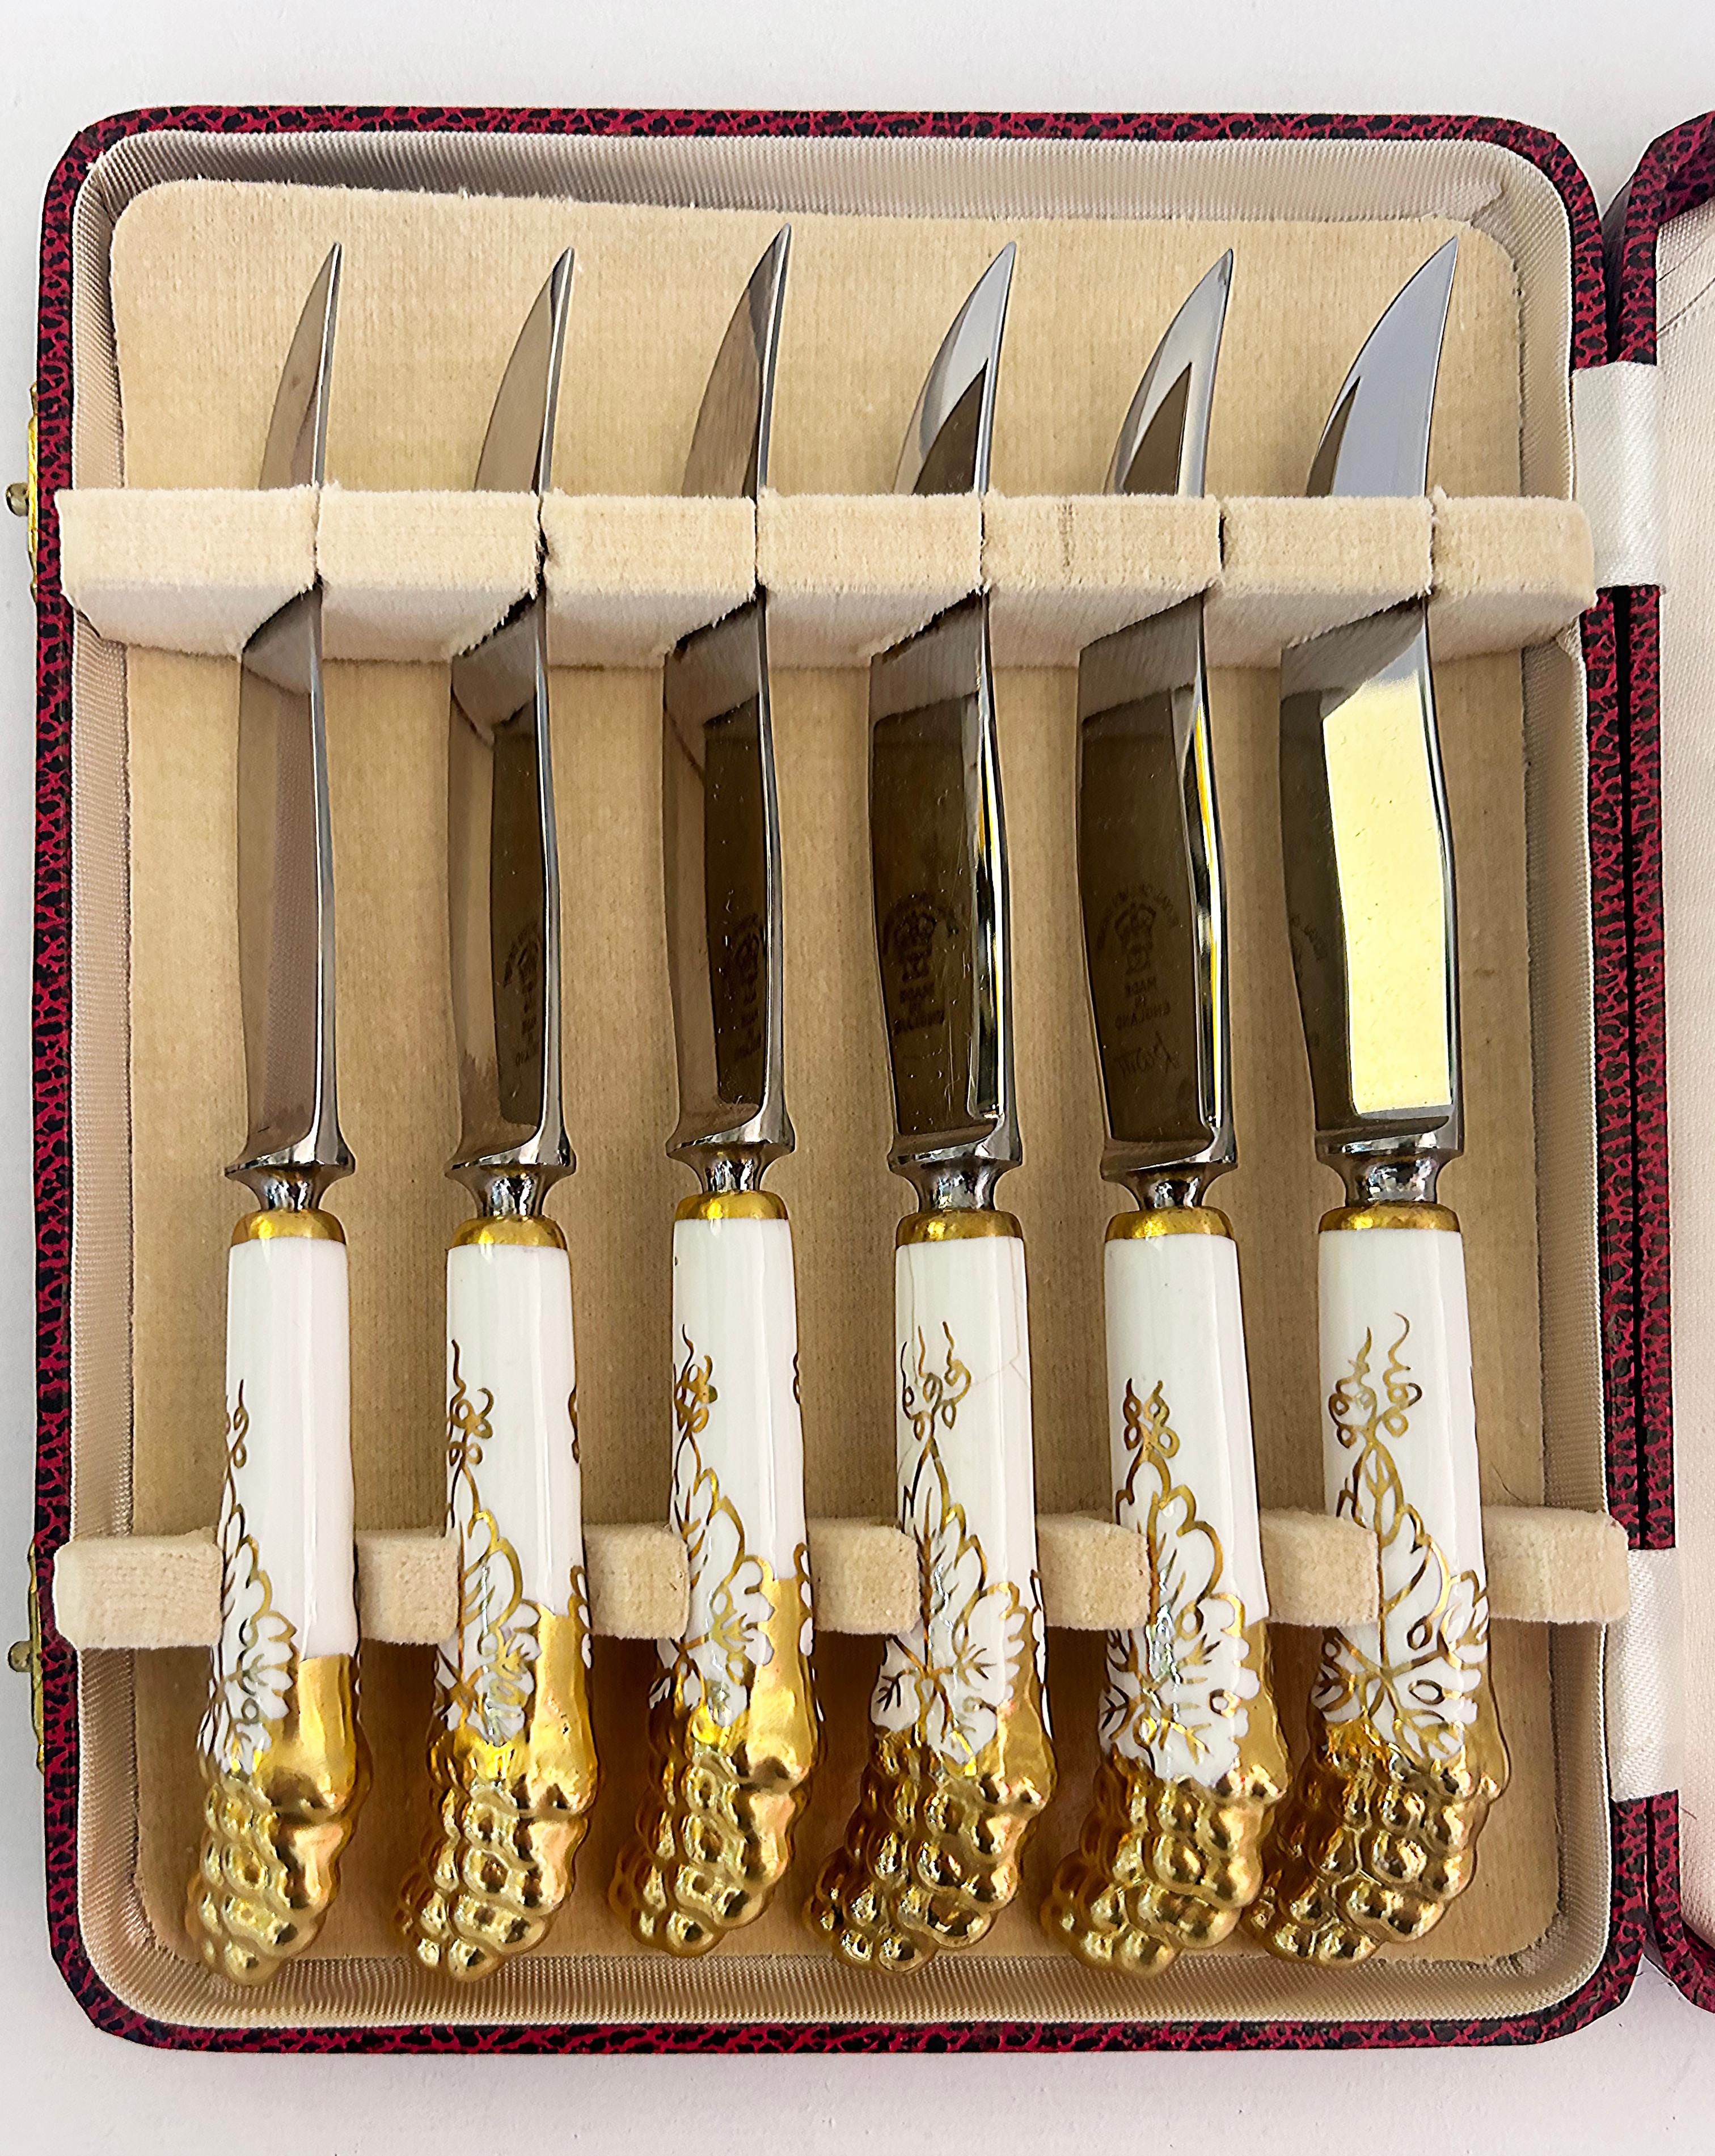 English Royal Crown Derby Porcelain, Stainless Fruit Knives Set, Grapes, Leather Box For Sale